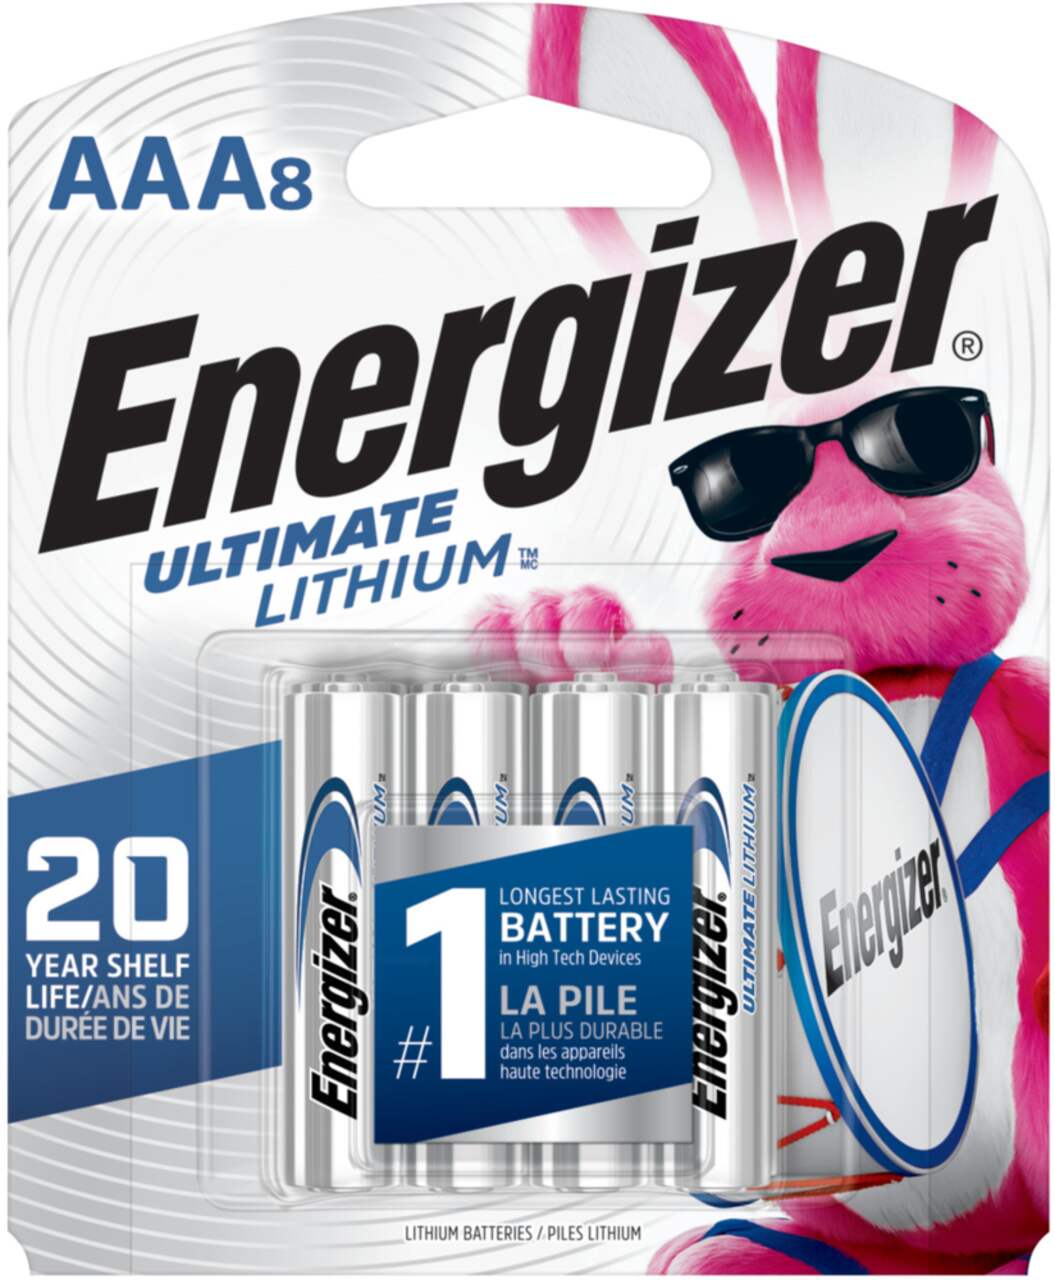  Energizer Ultimate Lithium AA Size Batteries - 20 Pack